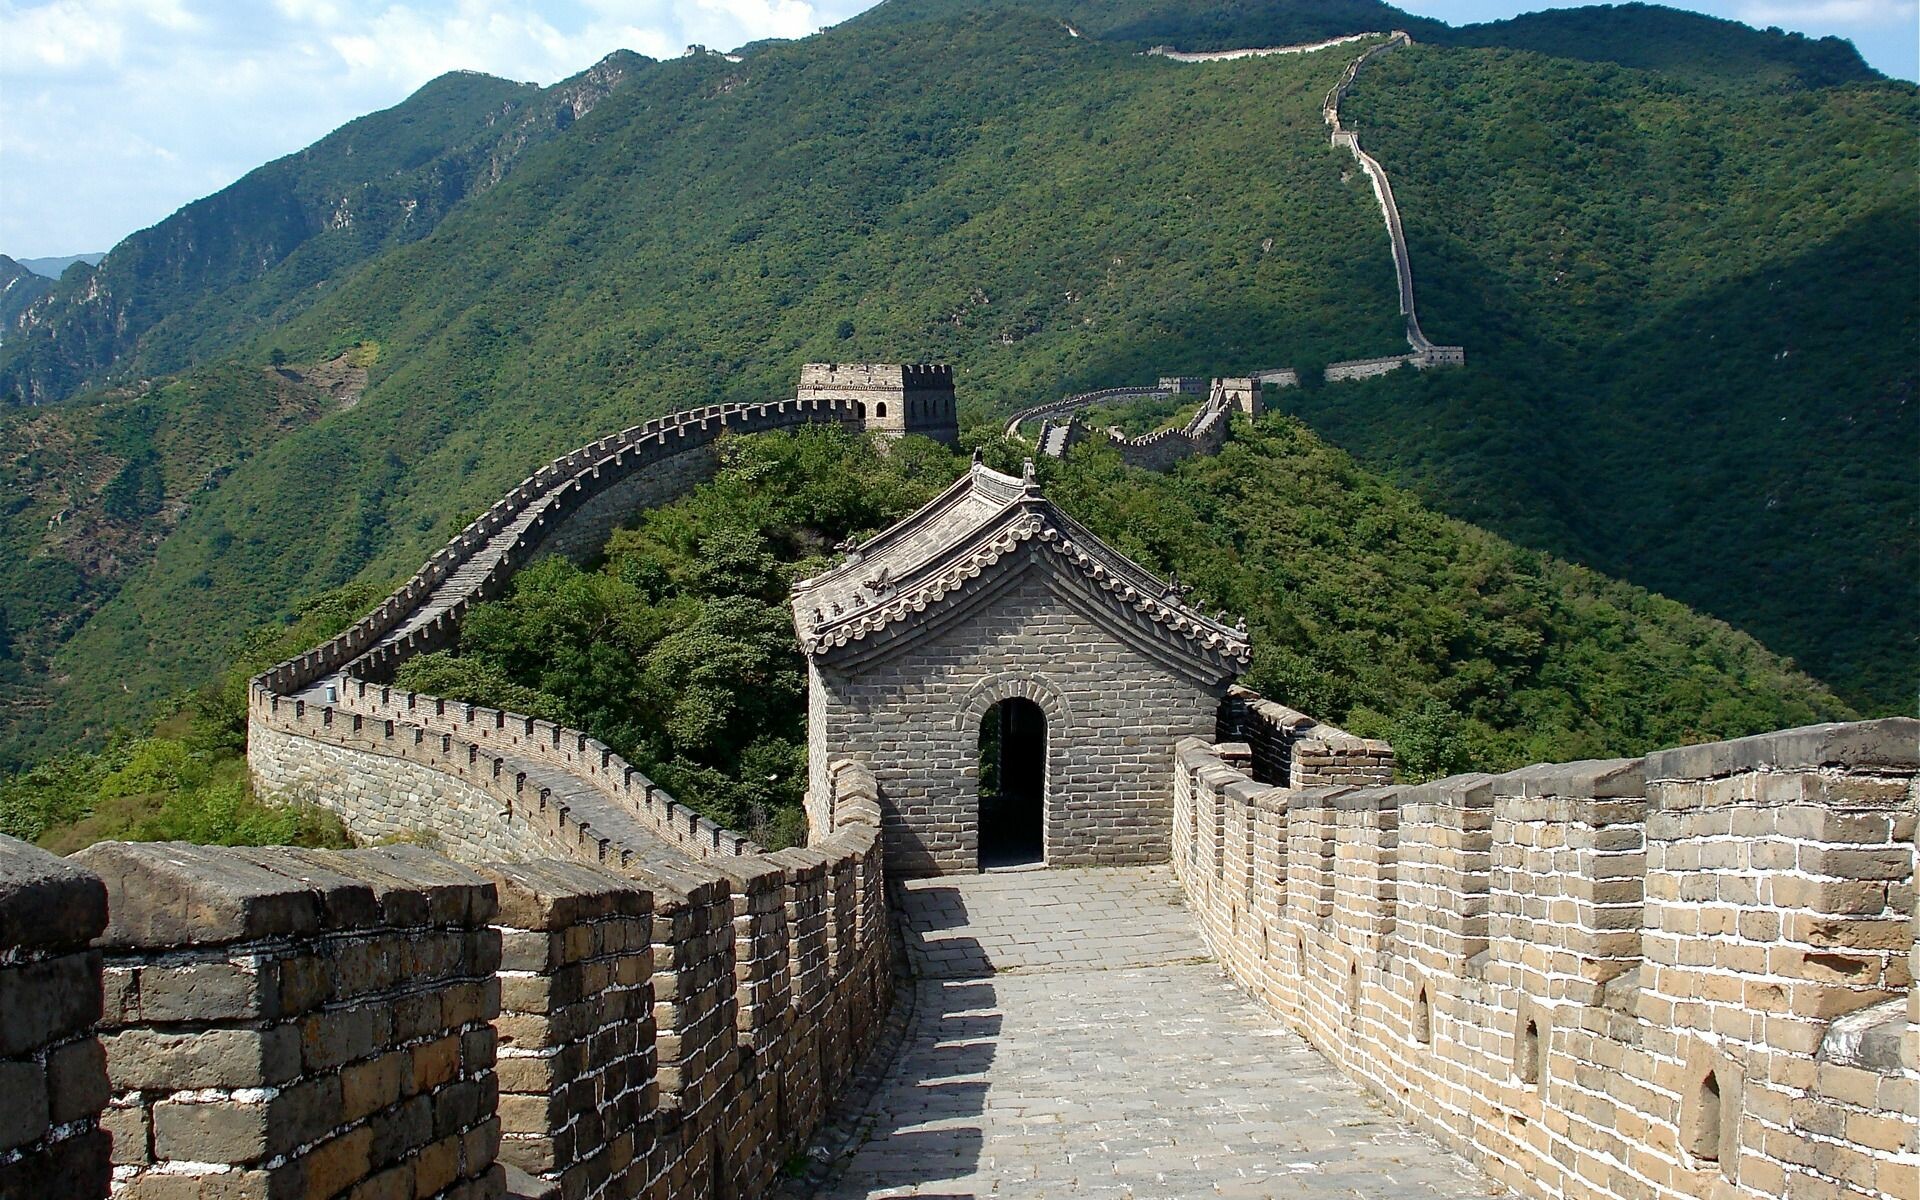 59+ Great Wall of China Wallpapers: HD, 4K, 5K for PC and Mobile | Download  free images for iPhone, Android